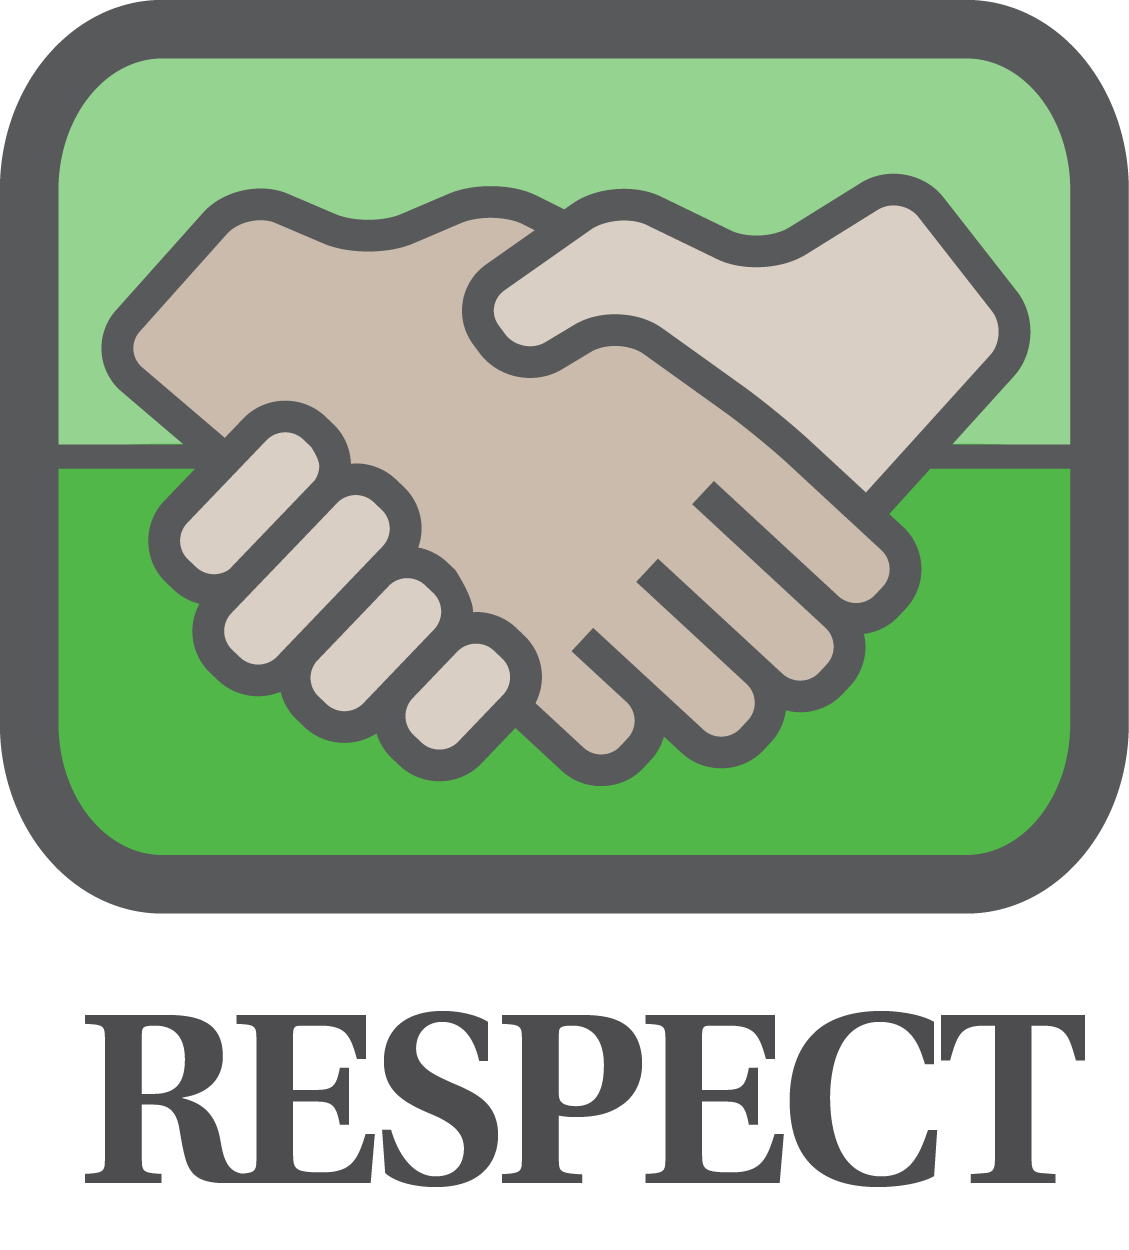 Icon of shaking hands representing "respect".